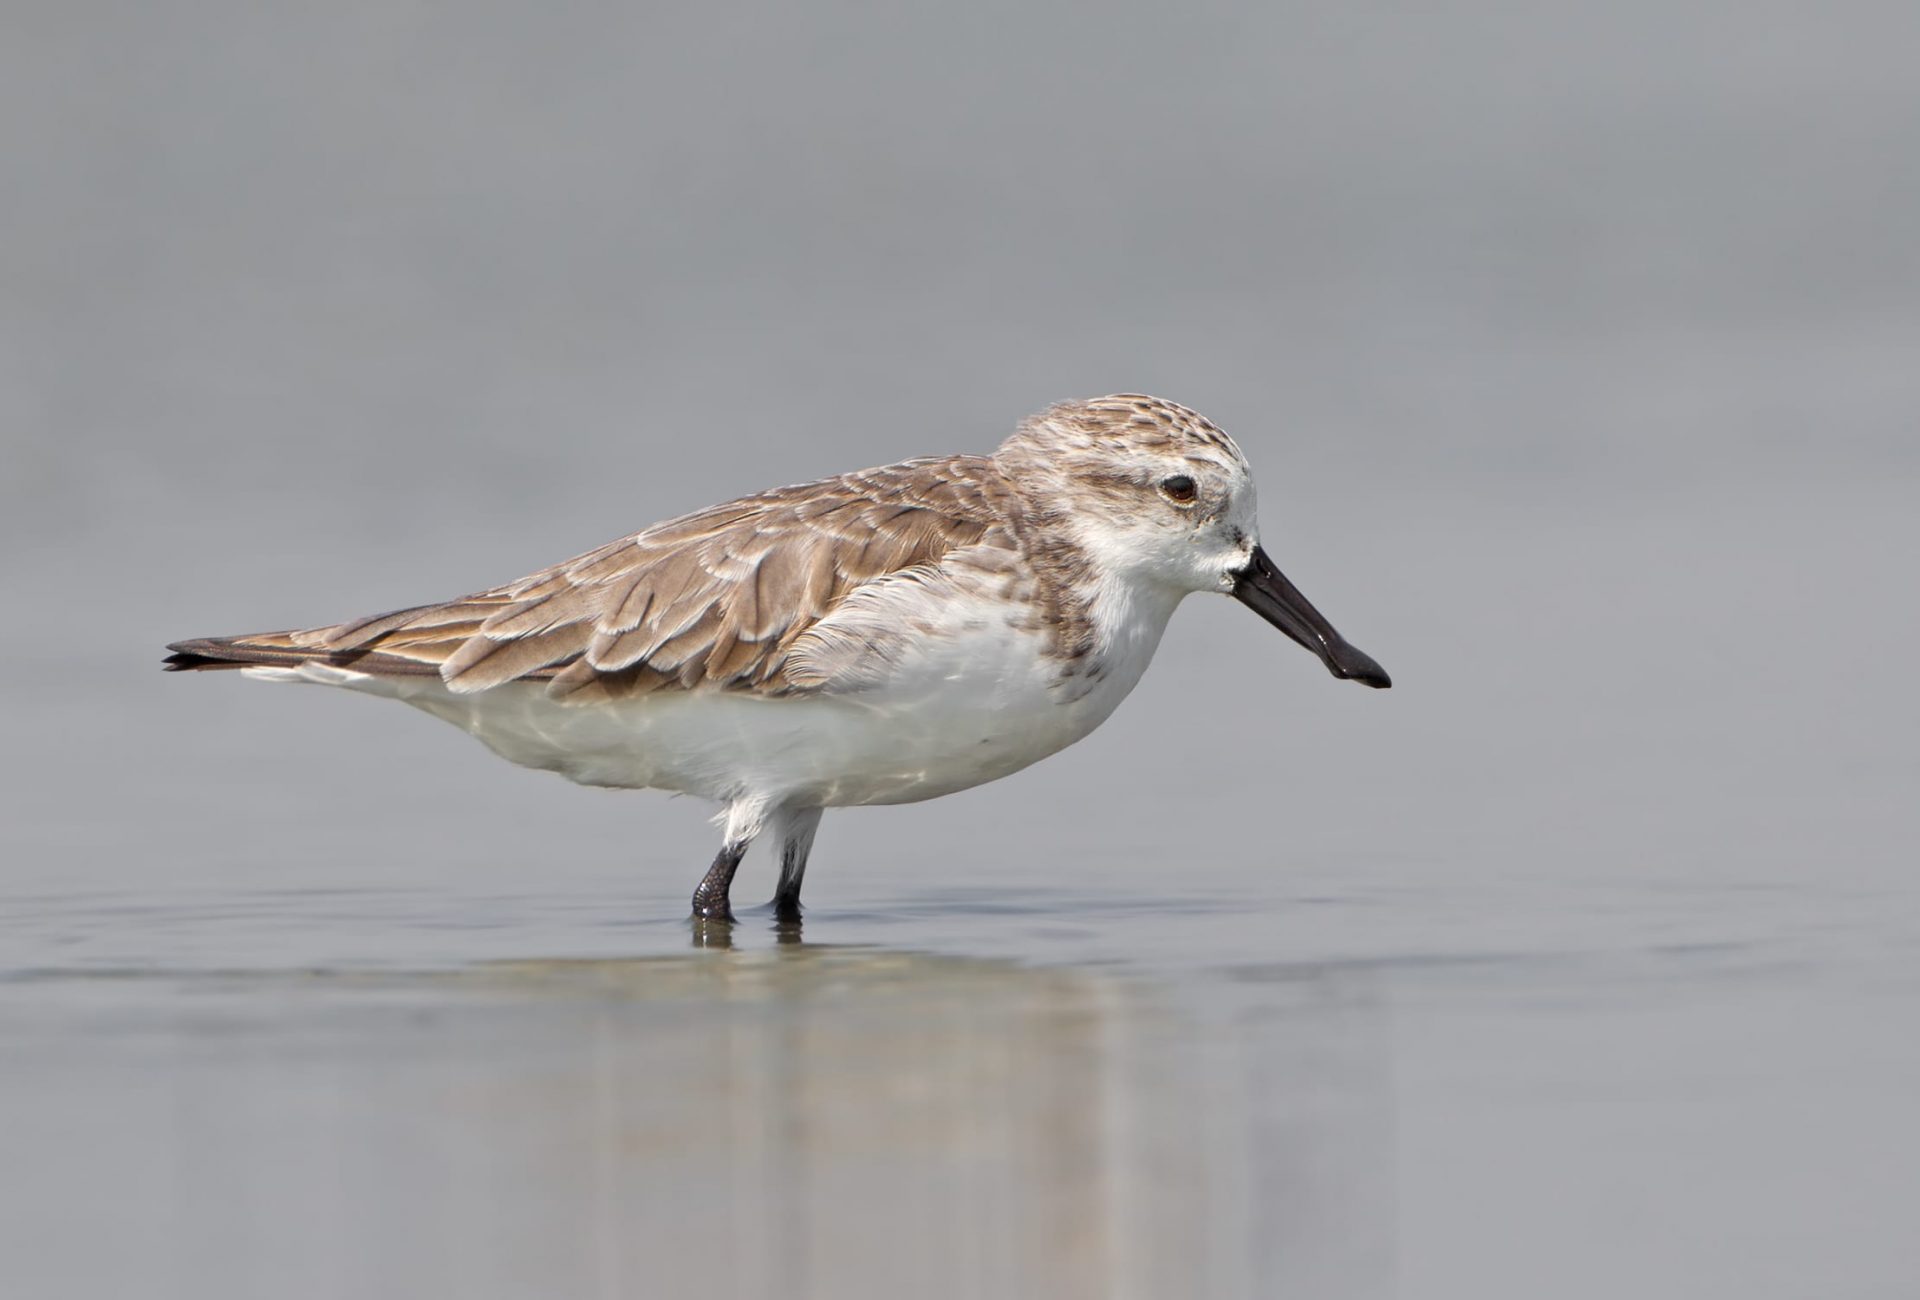 The Critically Endangered Spoon-billed Sandpiper